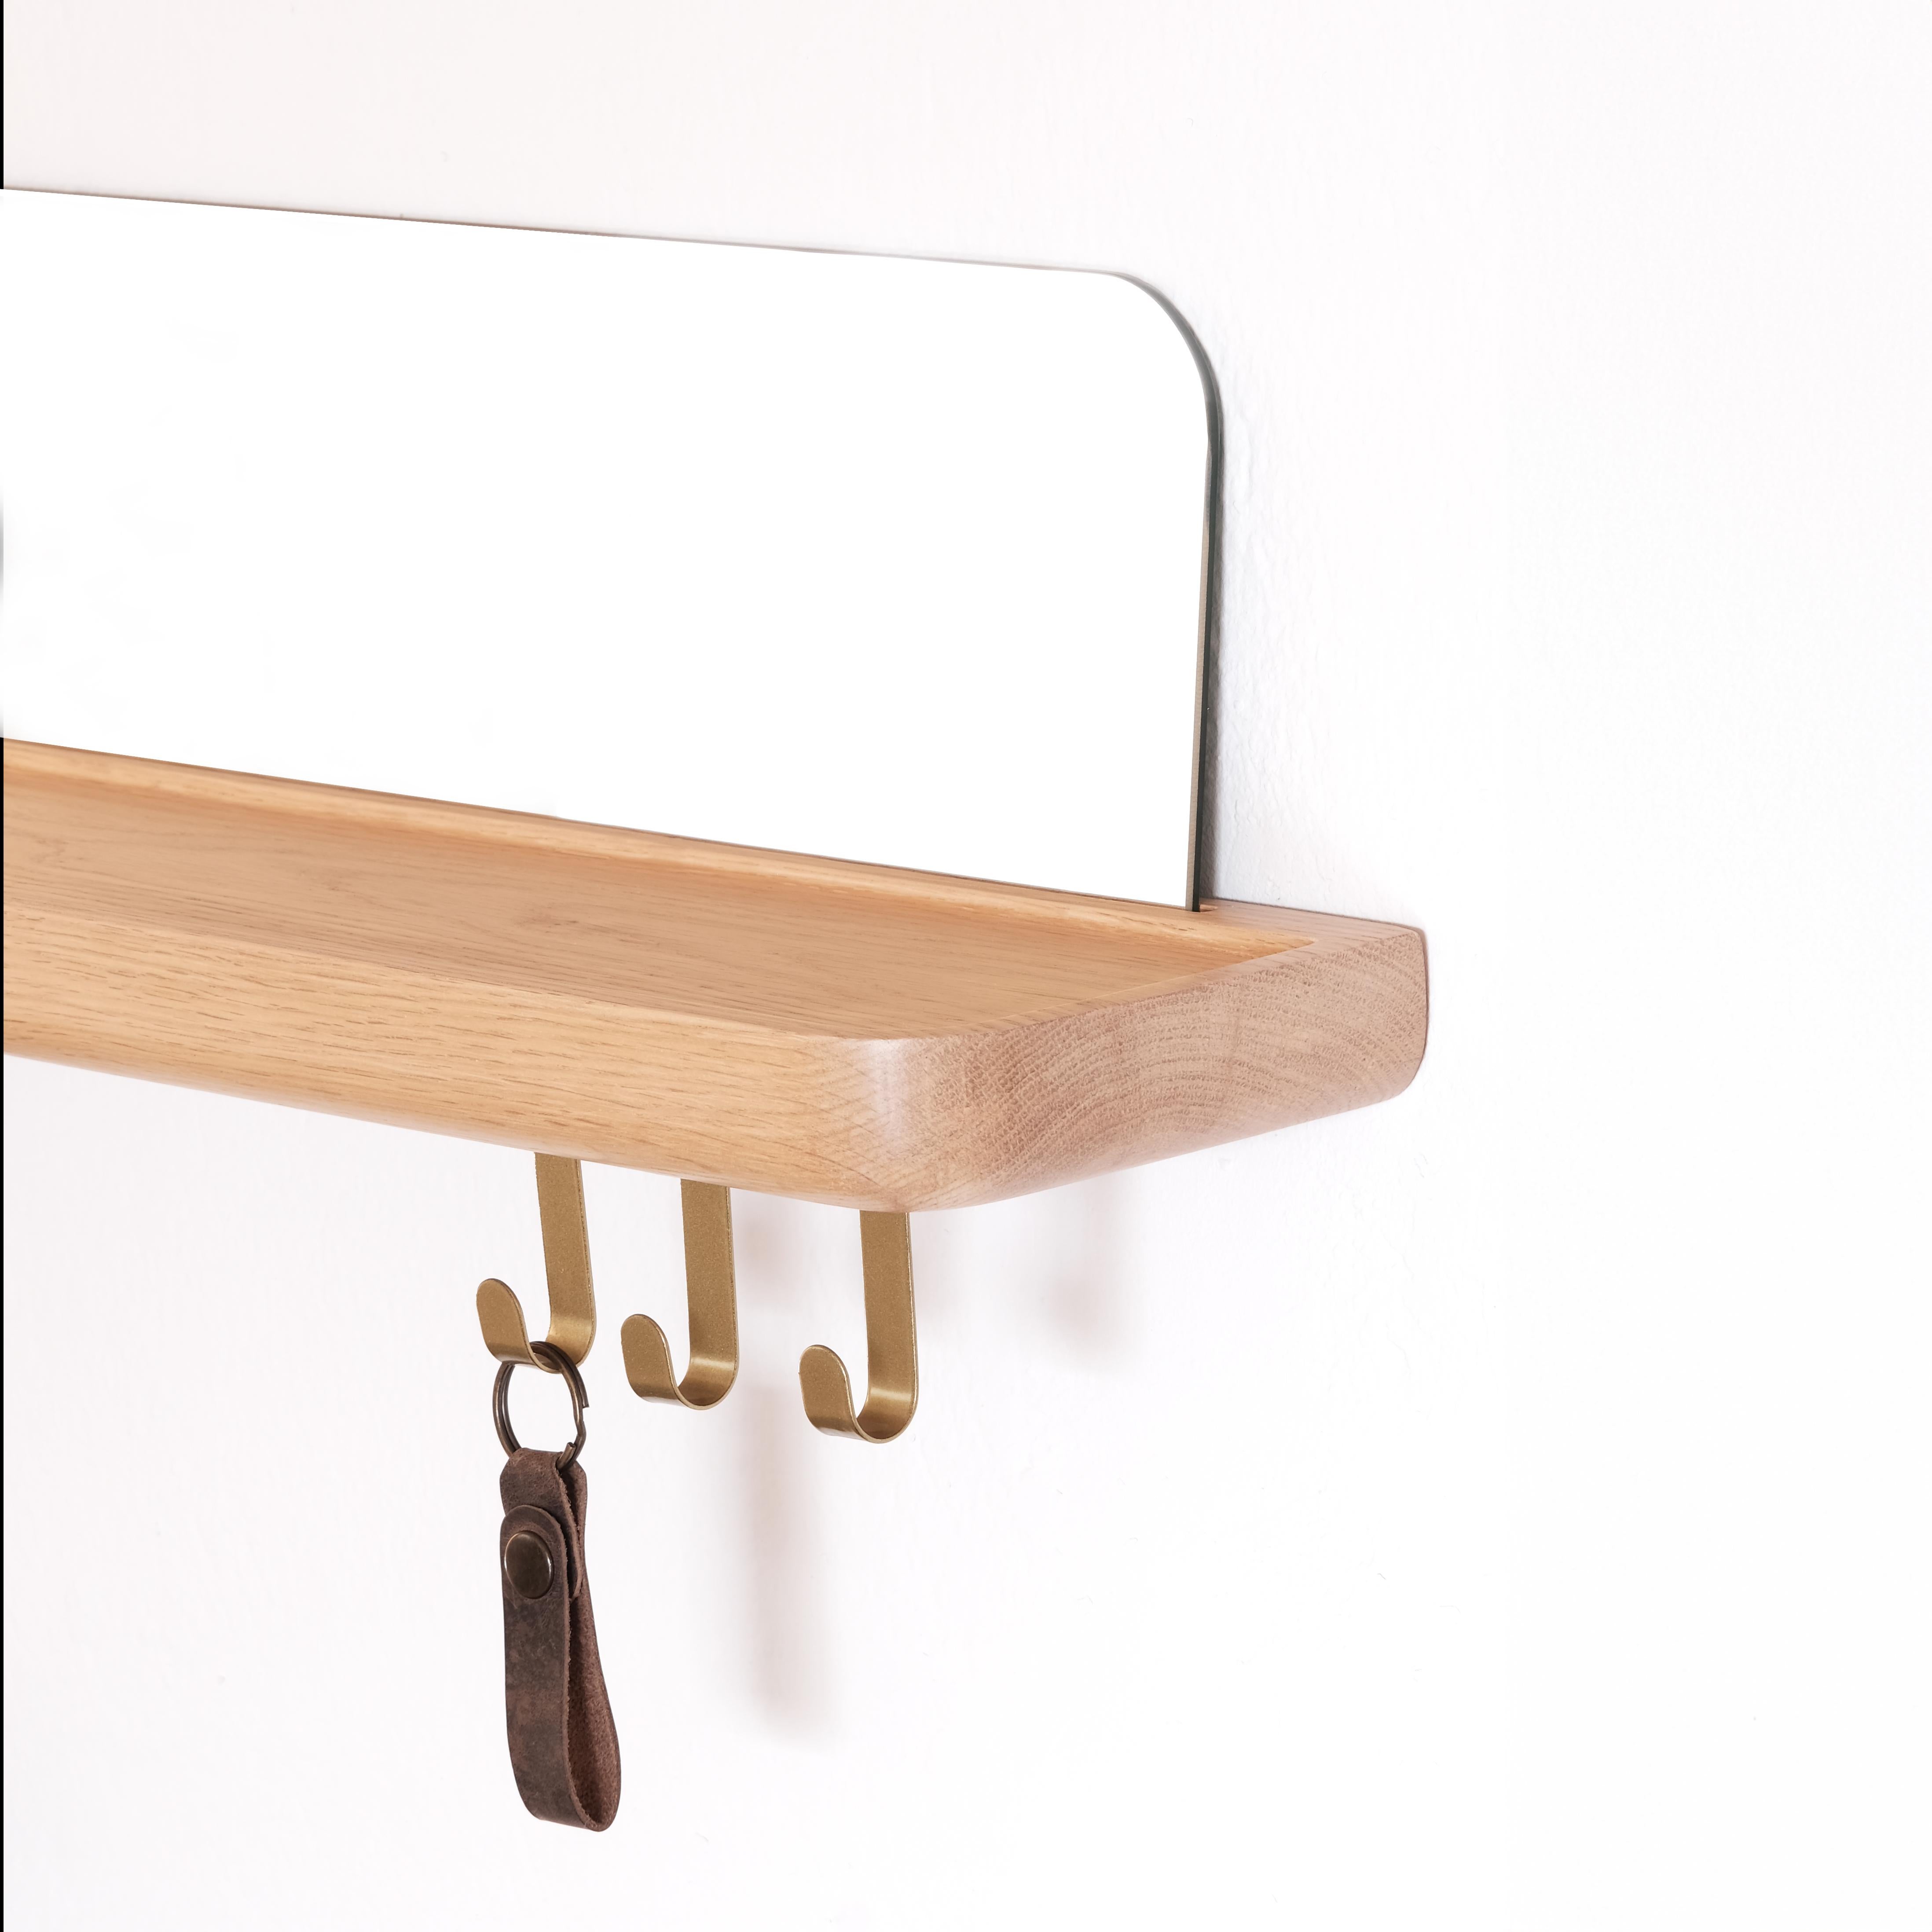 -Produced without using any adhesive, the shelf can be easily assembled with mechanical assembly.
-The floating shelf system was designed to be used in various occasions such as office, living room, bedroom, entryway, bathroom and so on. 
-Shelf has